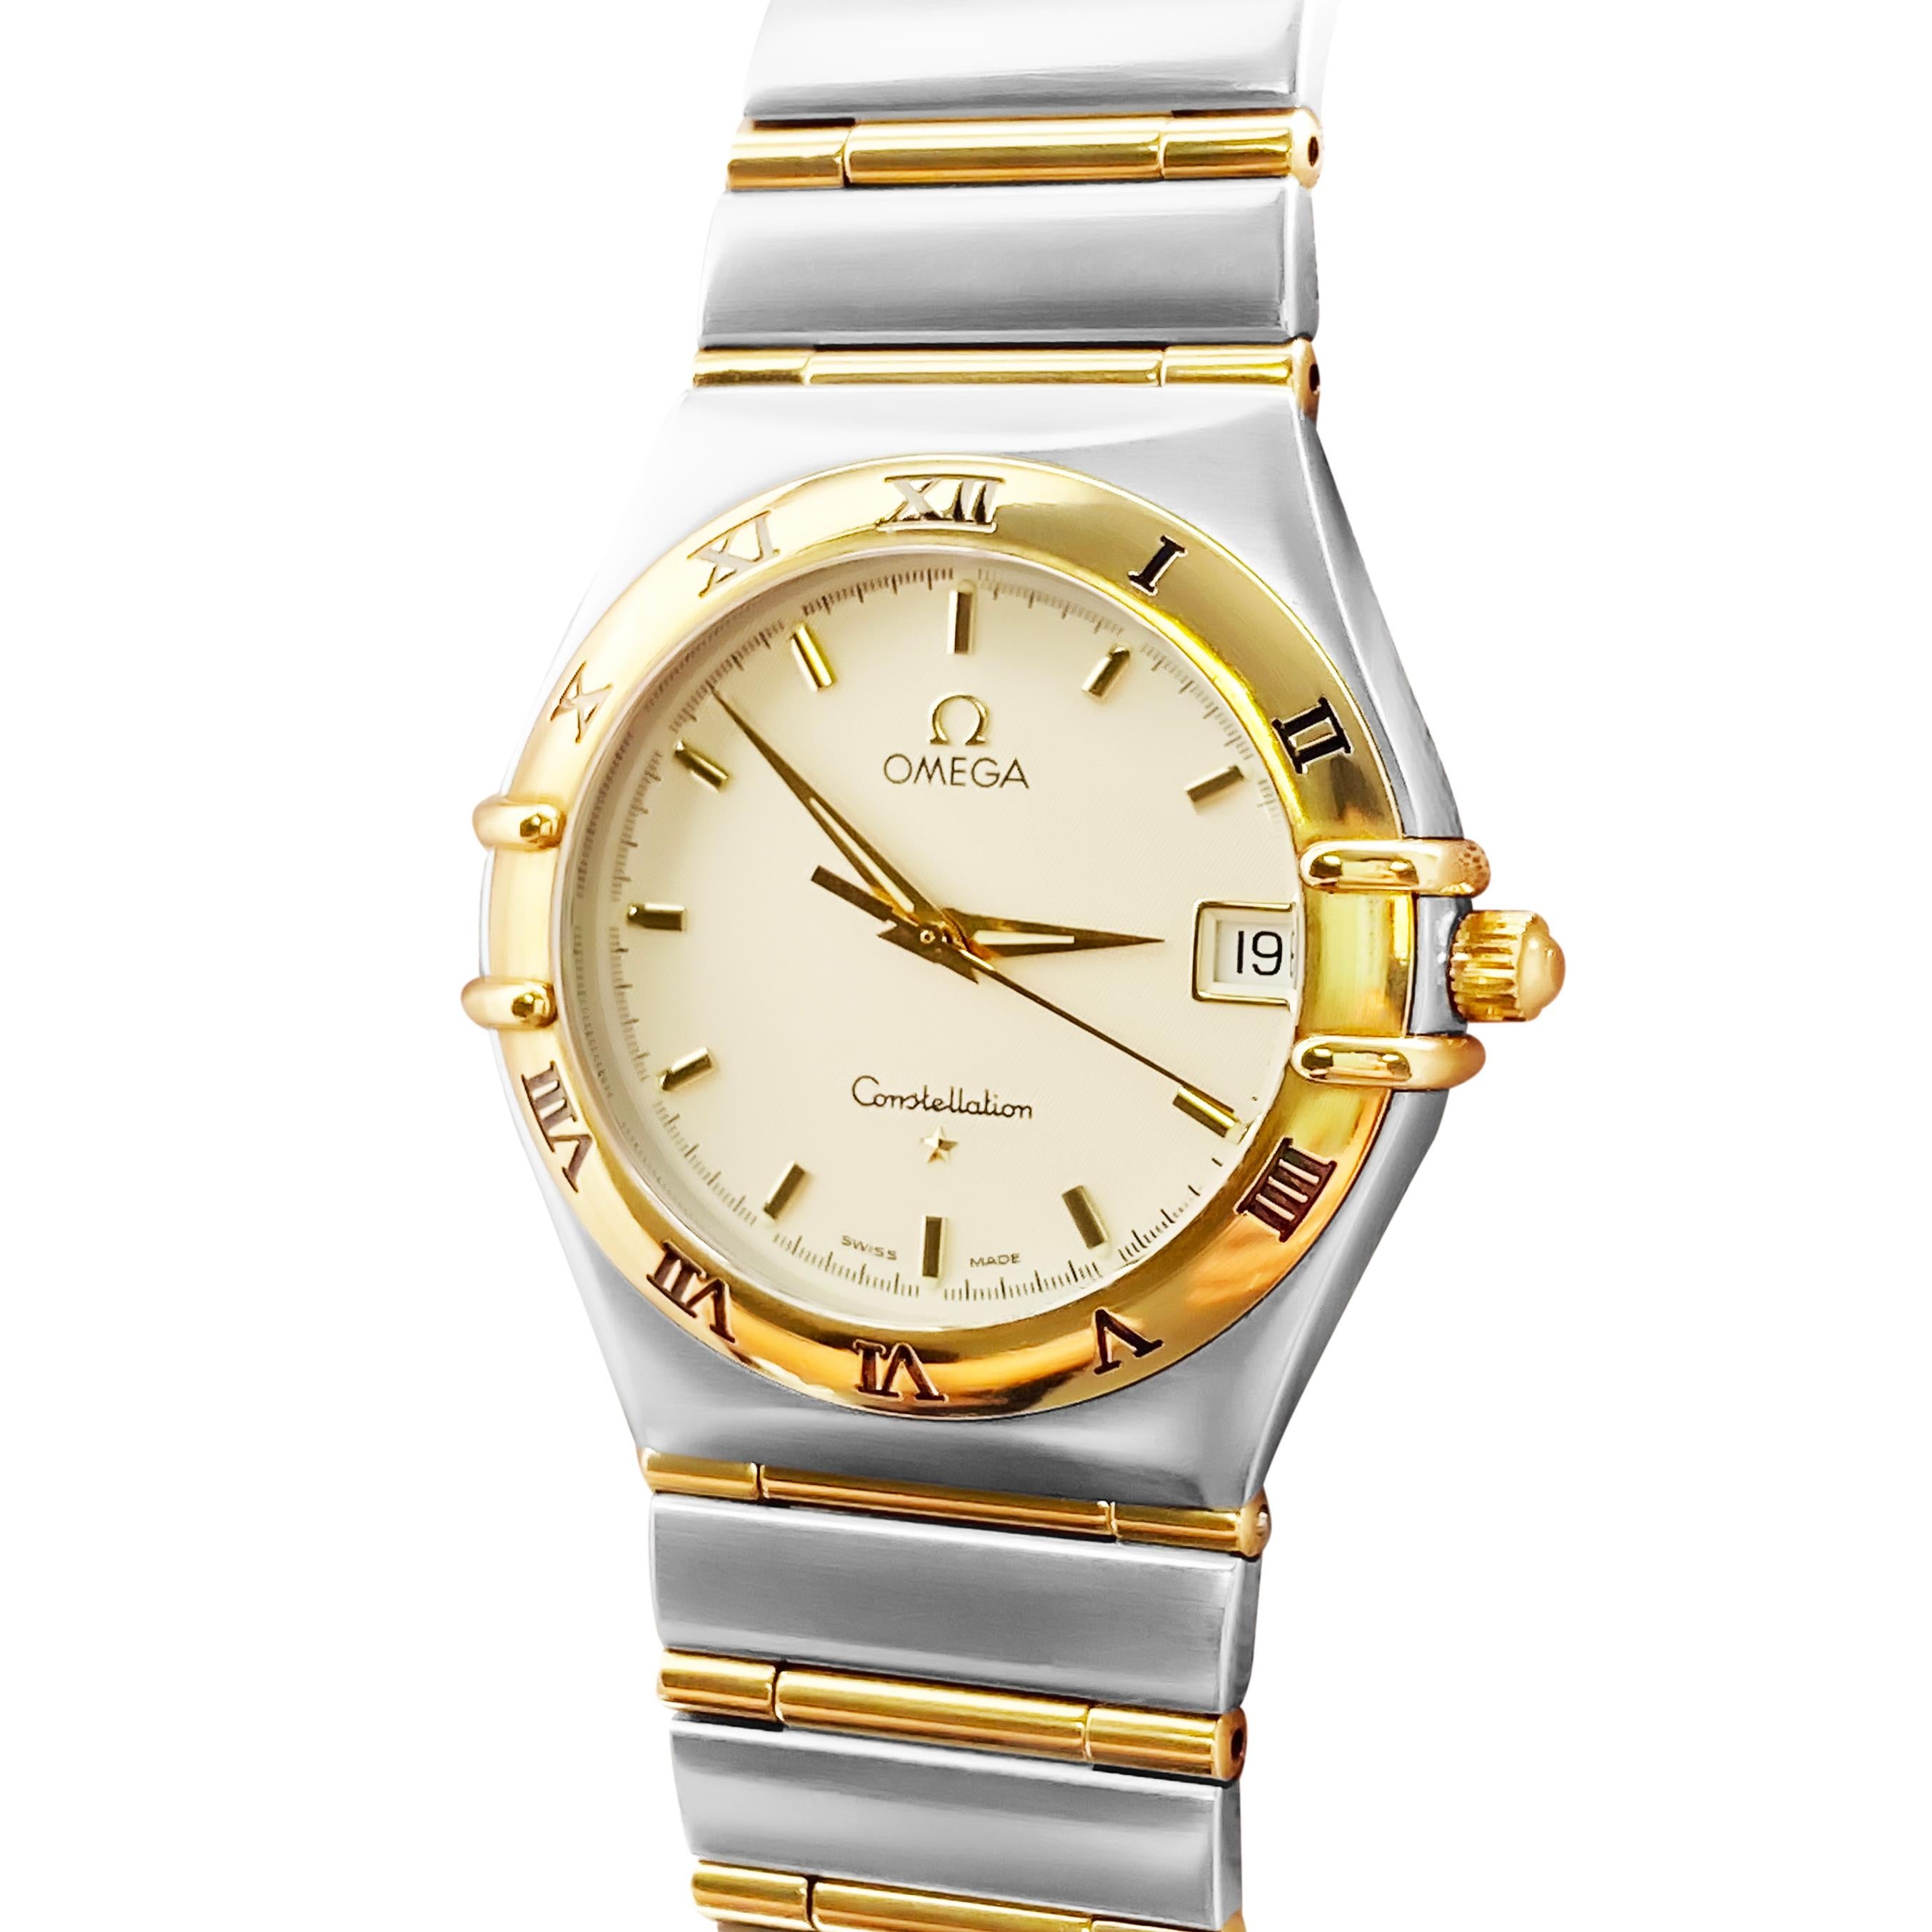 Omega constellation 
Stainless steel and gold. Full bar gold. 
Quartz
34mm Head
Cream dial 
Two tone. 
No box no papers

First appearing in 1952, the Constellation was designed to be Omega's bellwether watch. This was the brand's first mass-produced